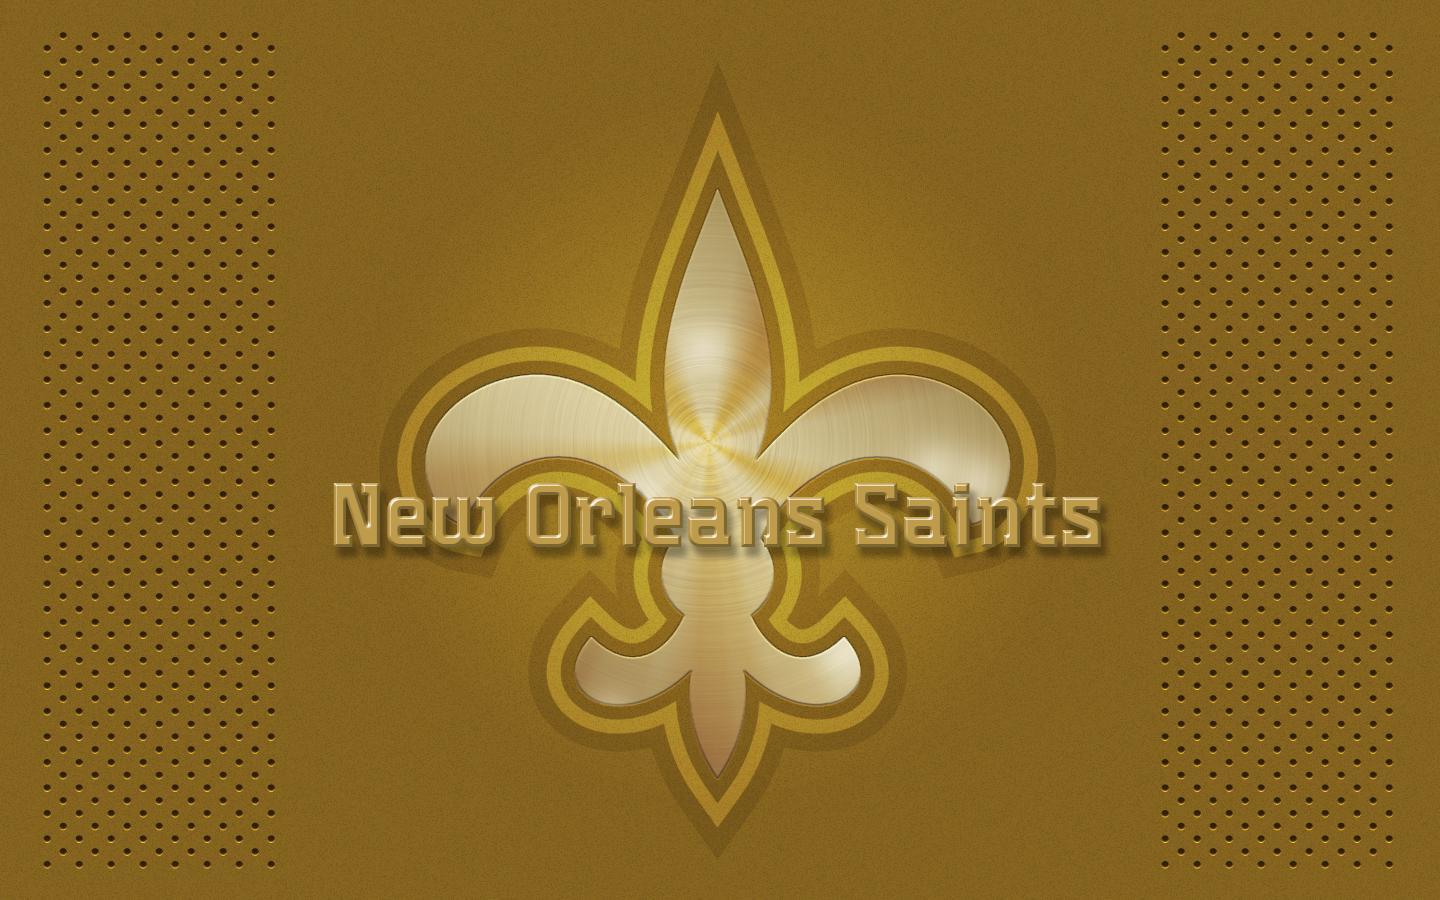 Free New Orleans Saints wallpaper background image. New Orleans